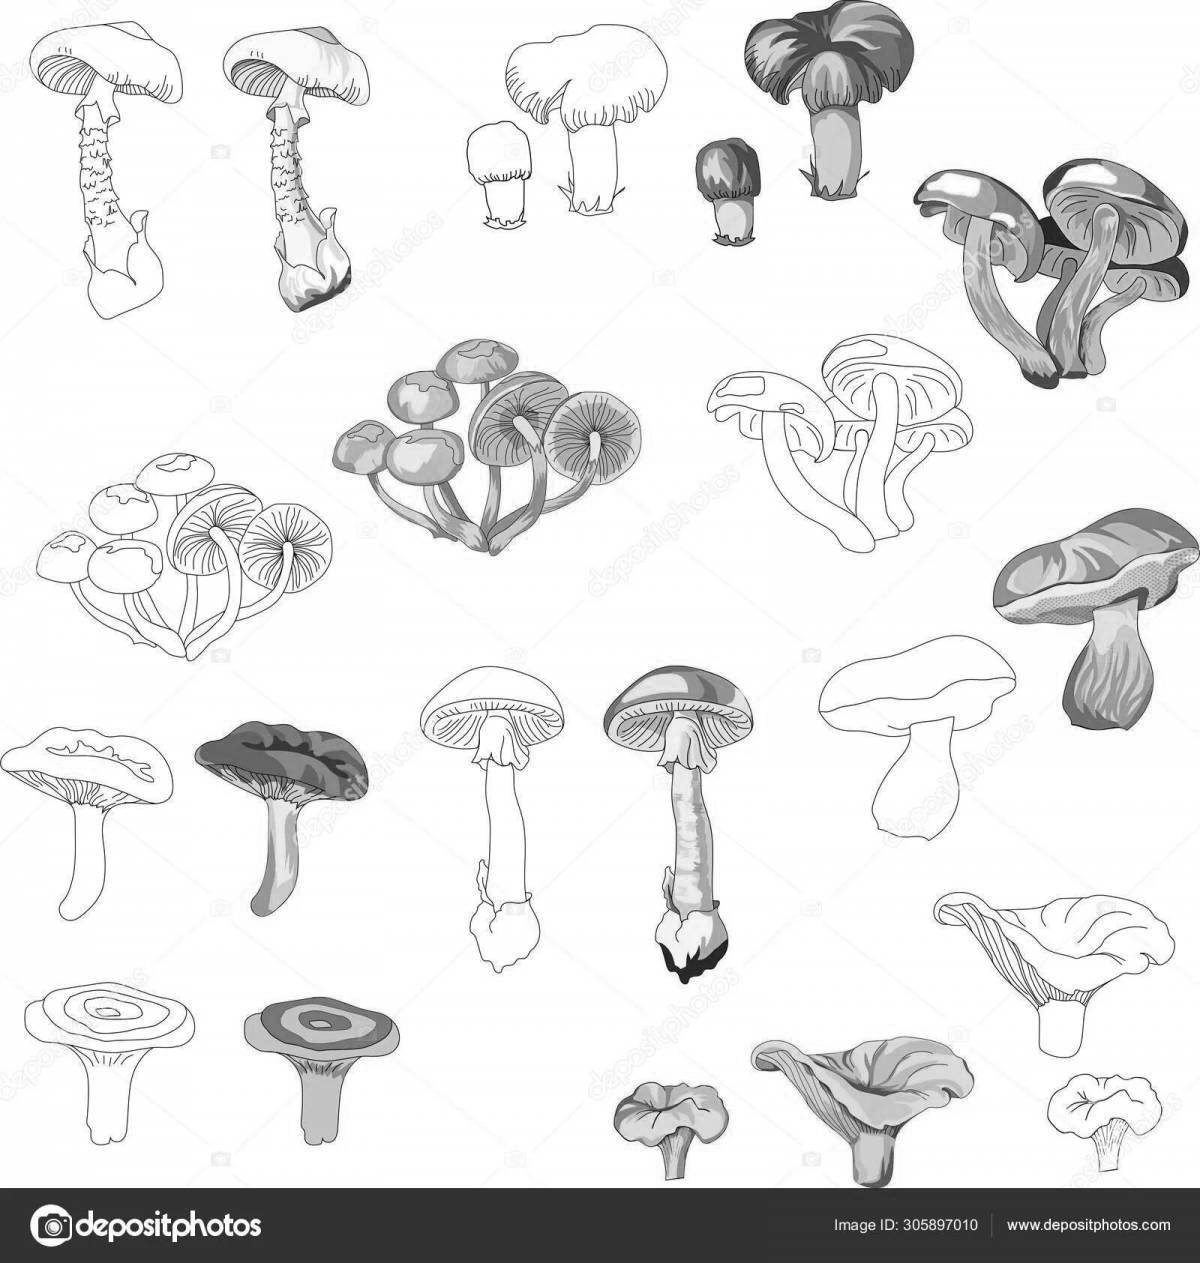 Attractive non-edible mushroom coloring pages